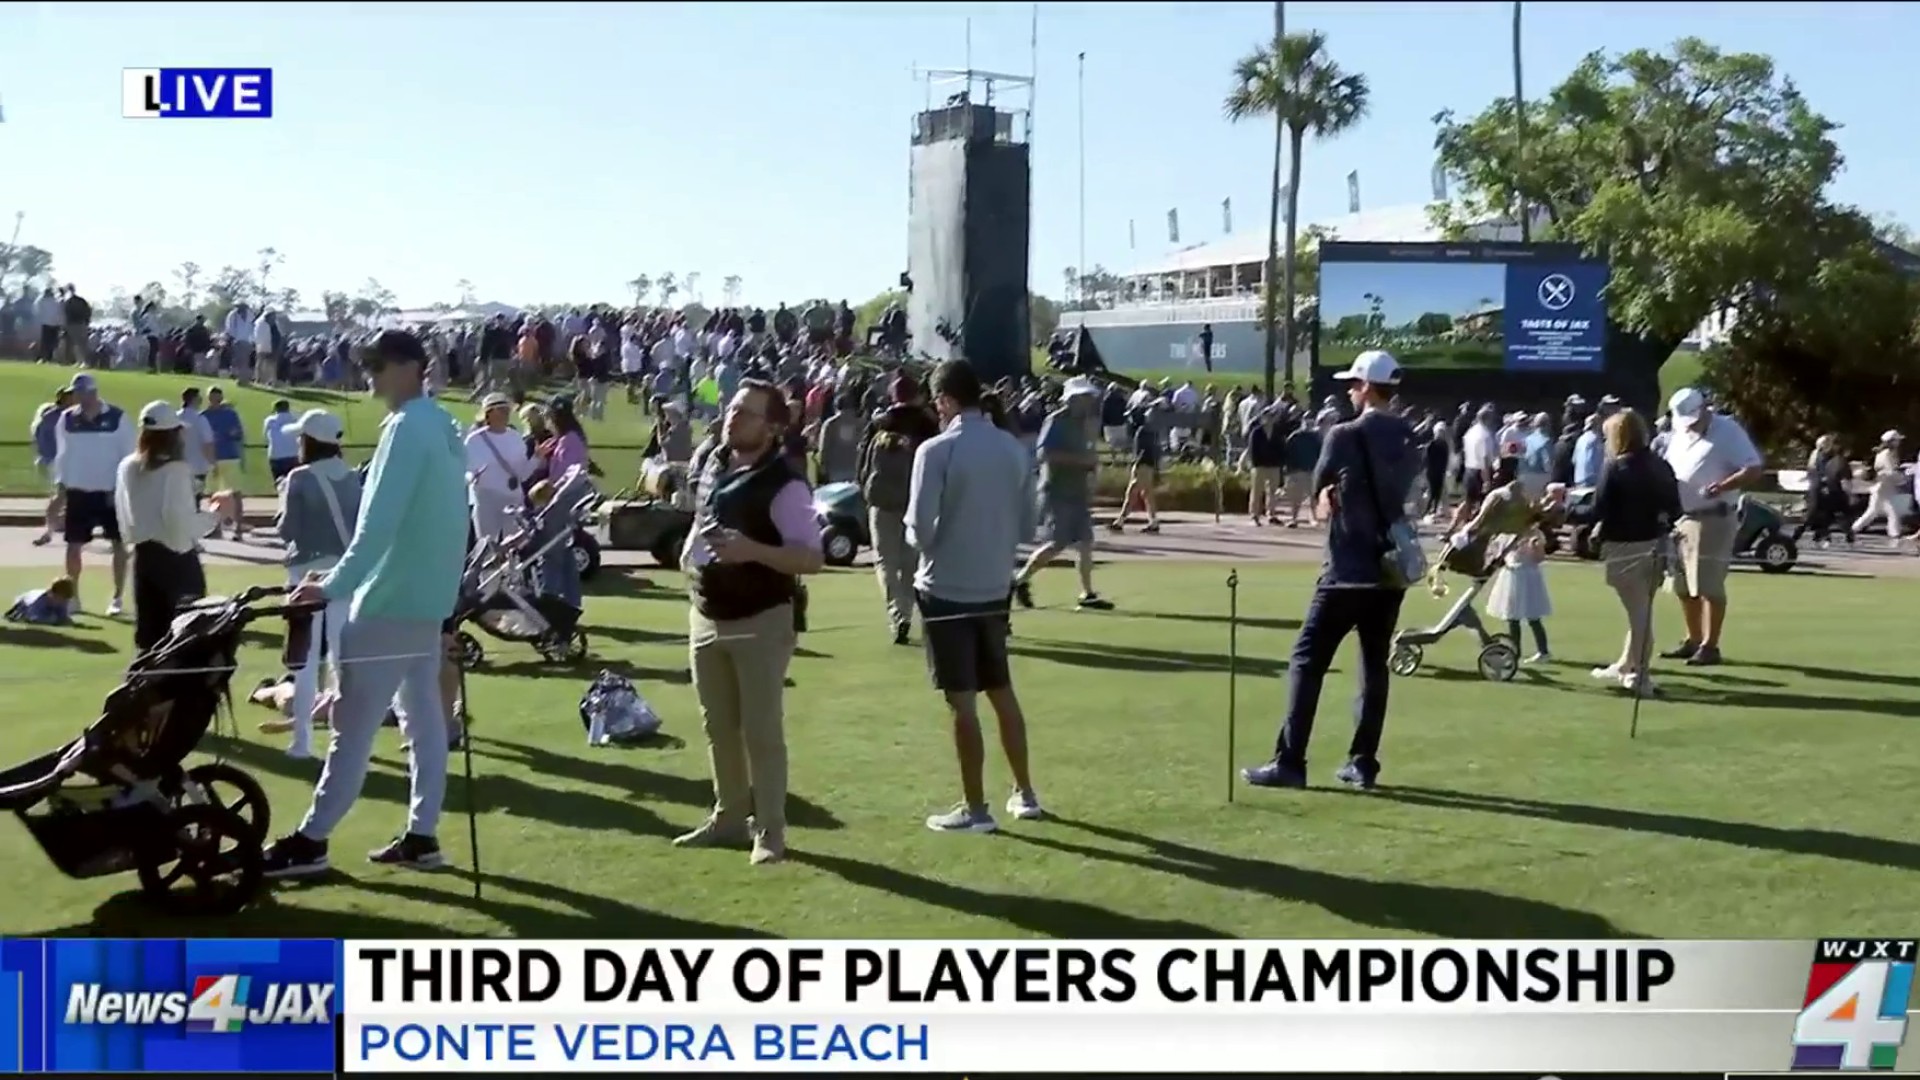 Its the third day of The Players Championship